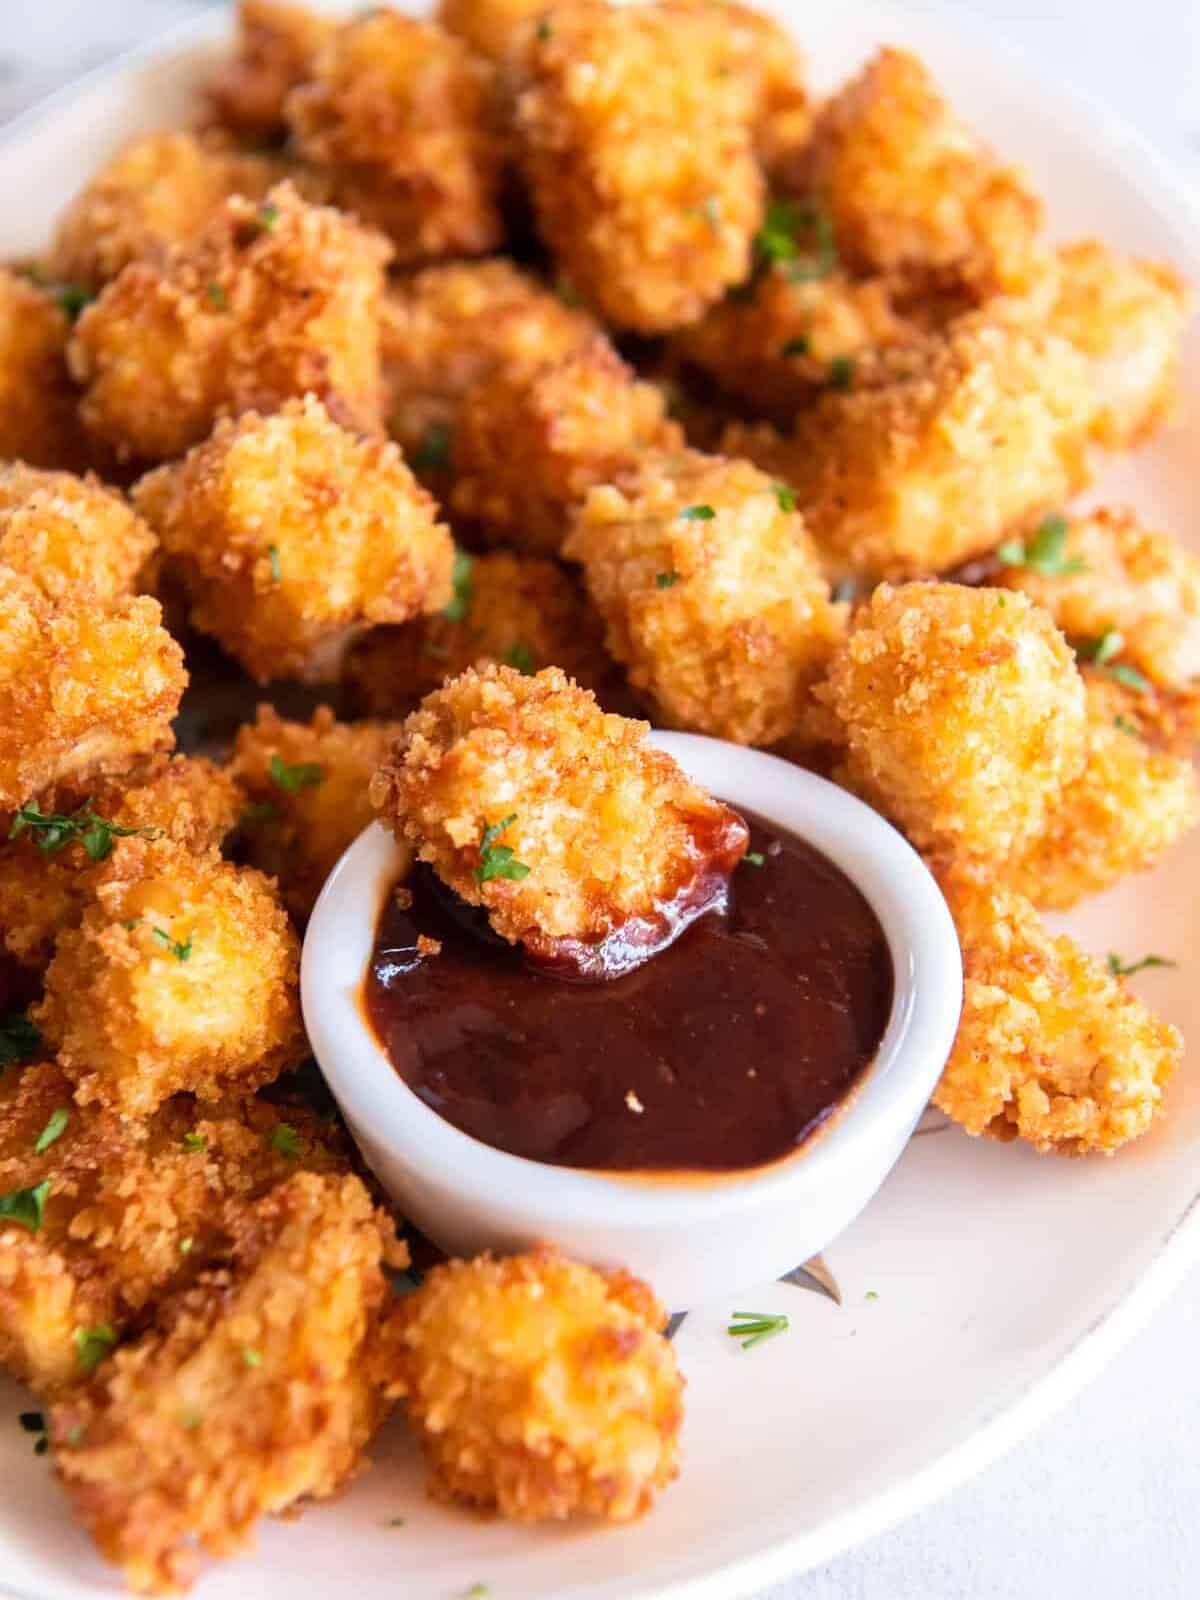 a piece of popcorn chicken being dipped into dipping sauce on a platter of popcorn chicken.